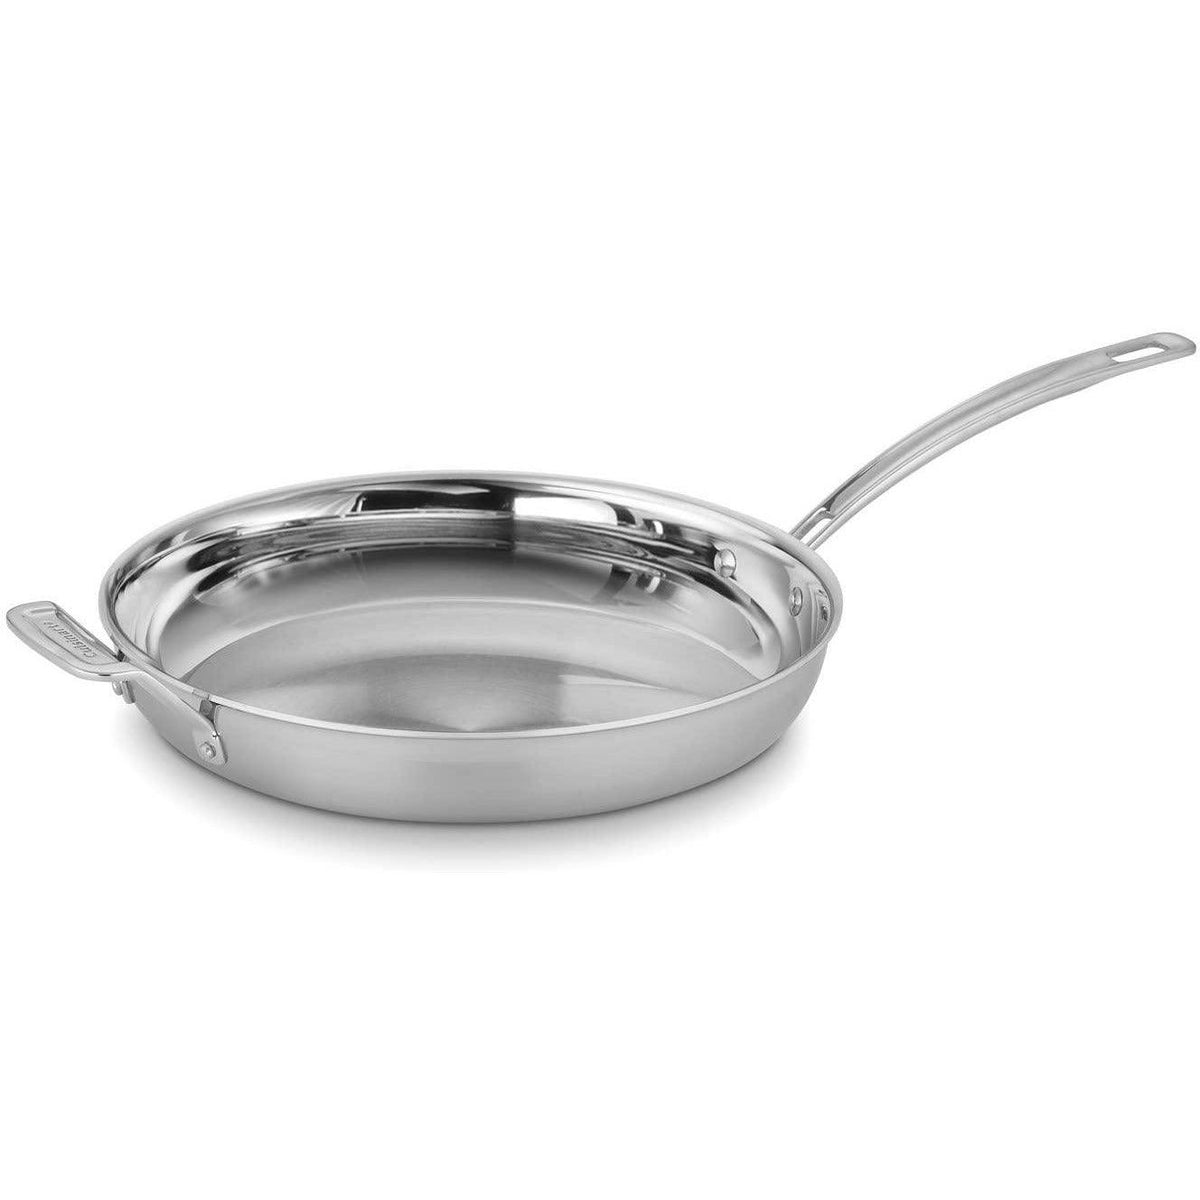 https://luxio.com/cdn/shop/files/cuisinart-multiclad-pro-stainless-12-inch-skillet-with-helper-luxio-1_1200x1200.jpg?v=1690865881